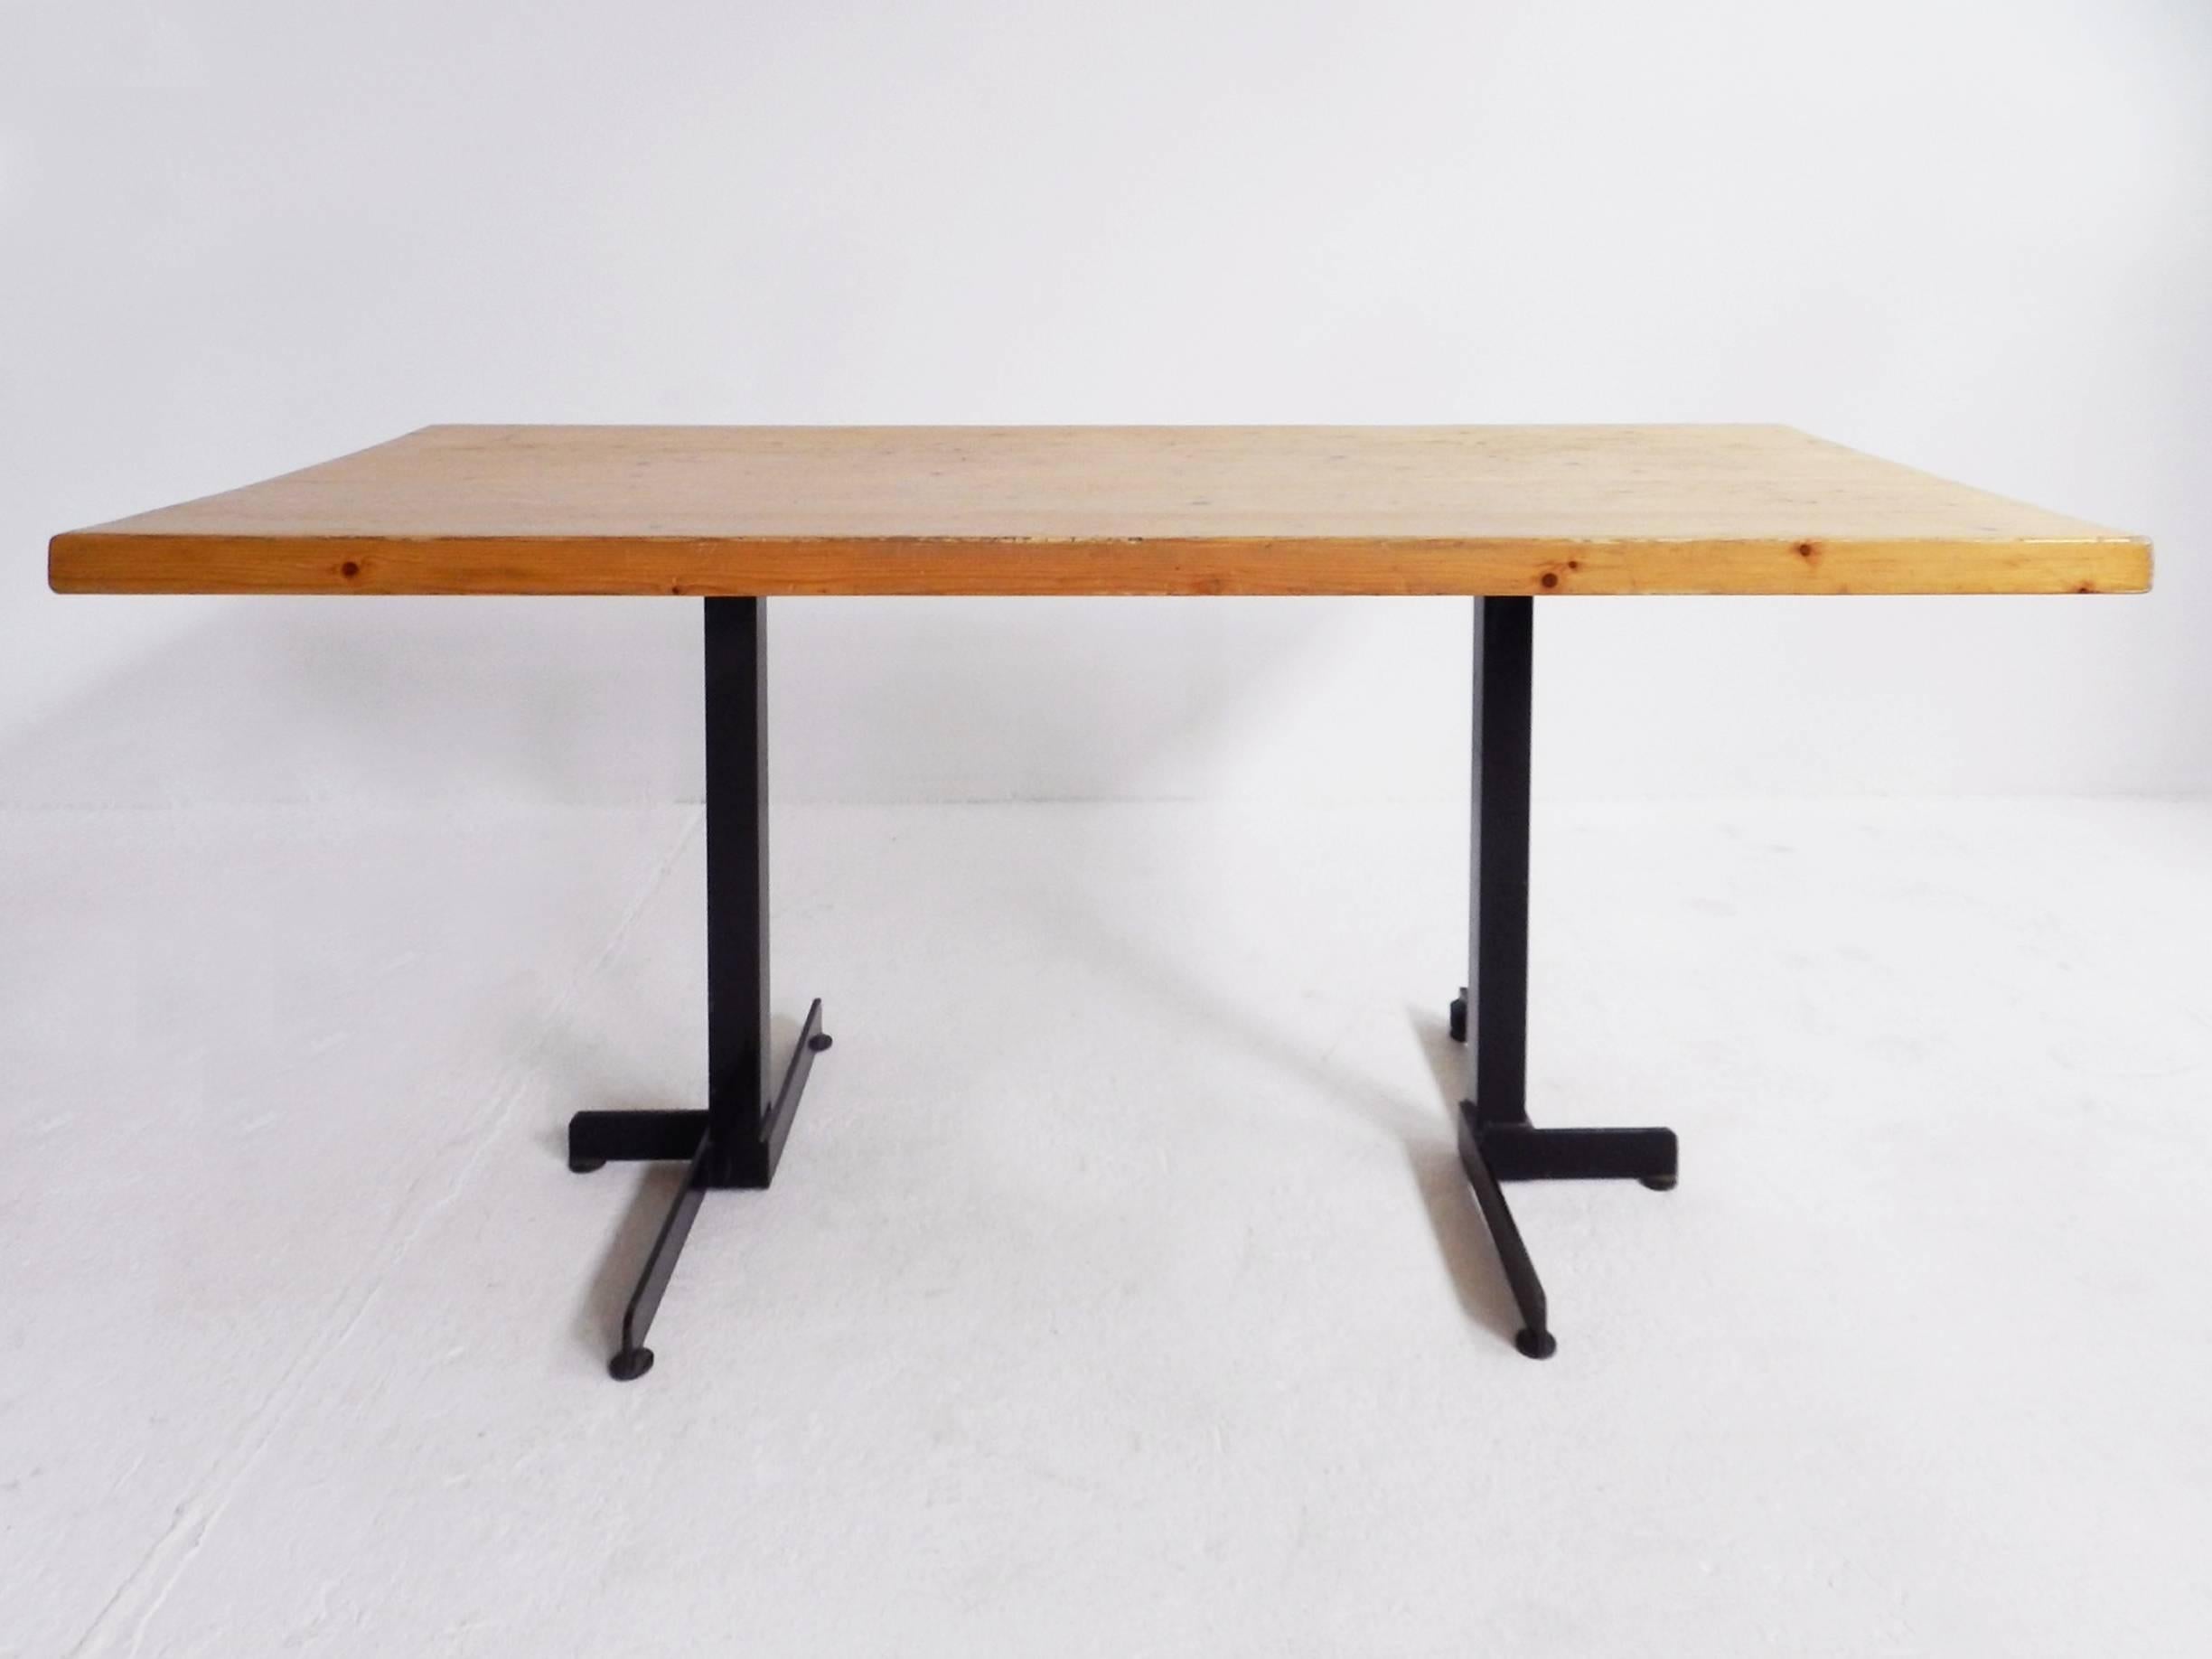 Iconic table designed by Charlotte Perriand for Les Arcs ski resort circa 1960, manufactured in France. 
It is made from beautiful pine wood and remains in original condition.